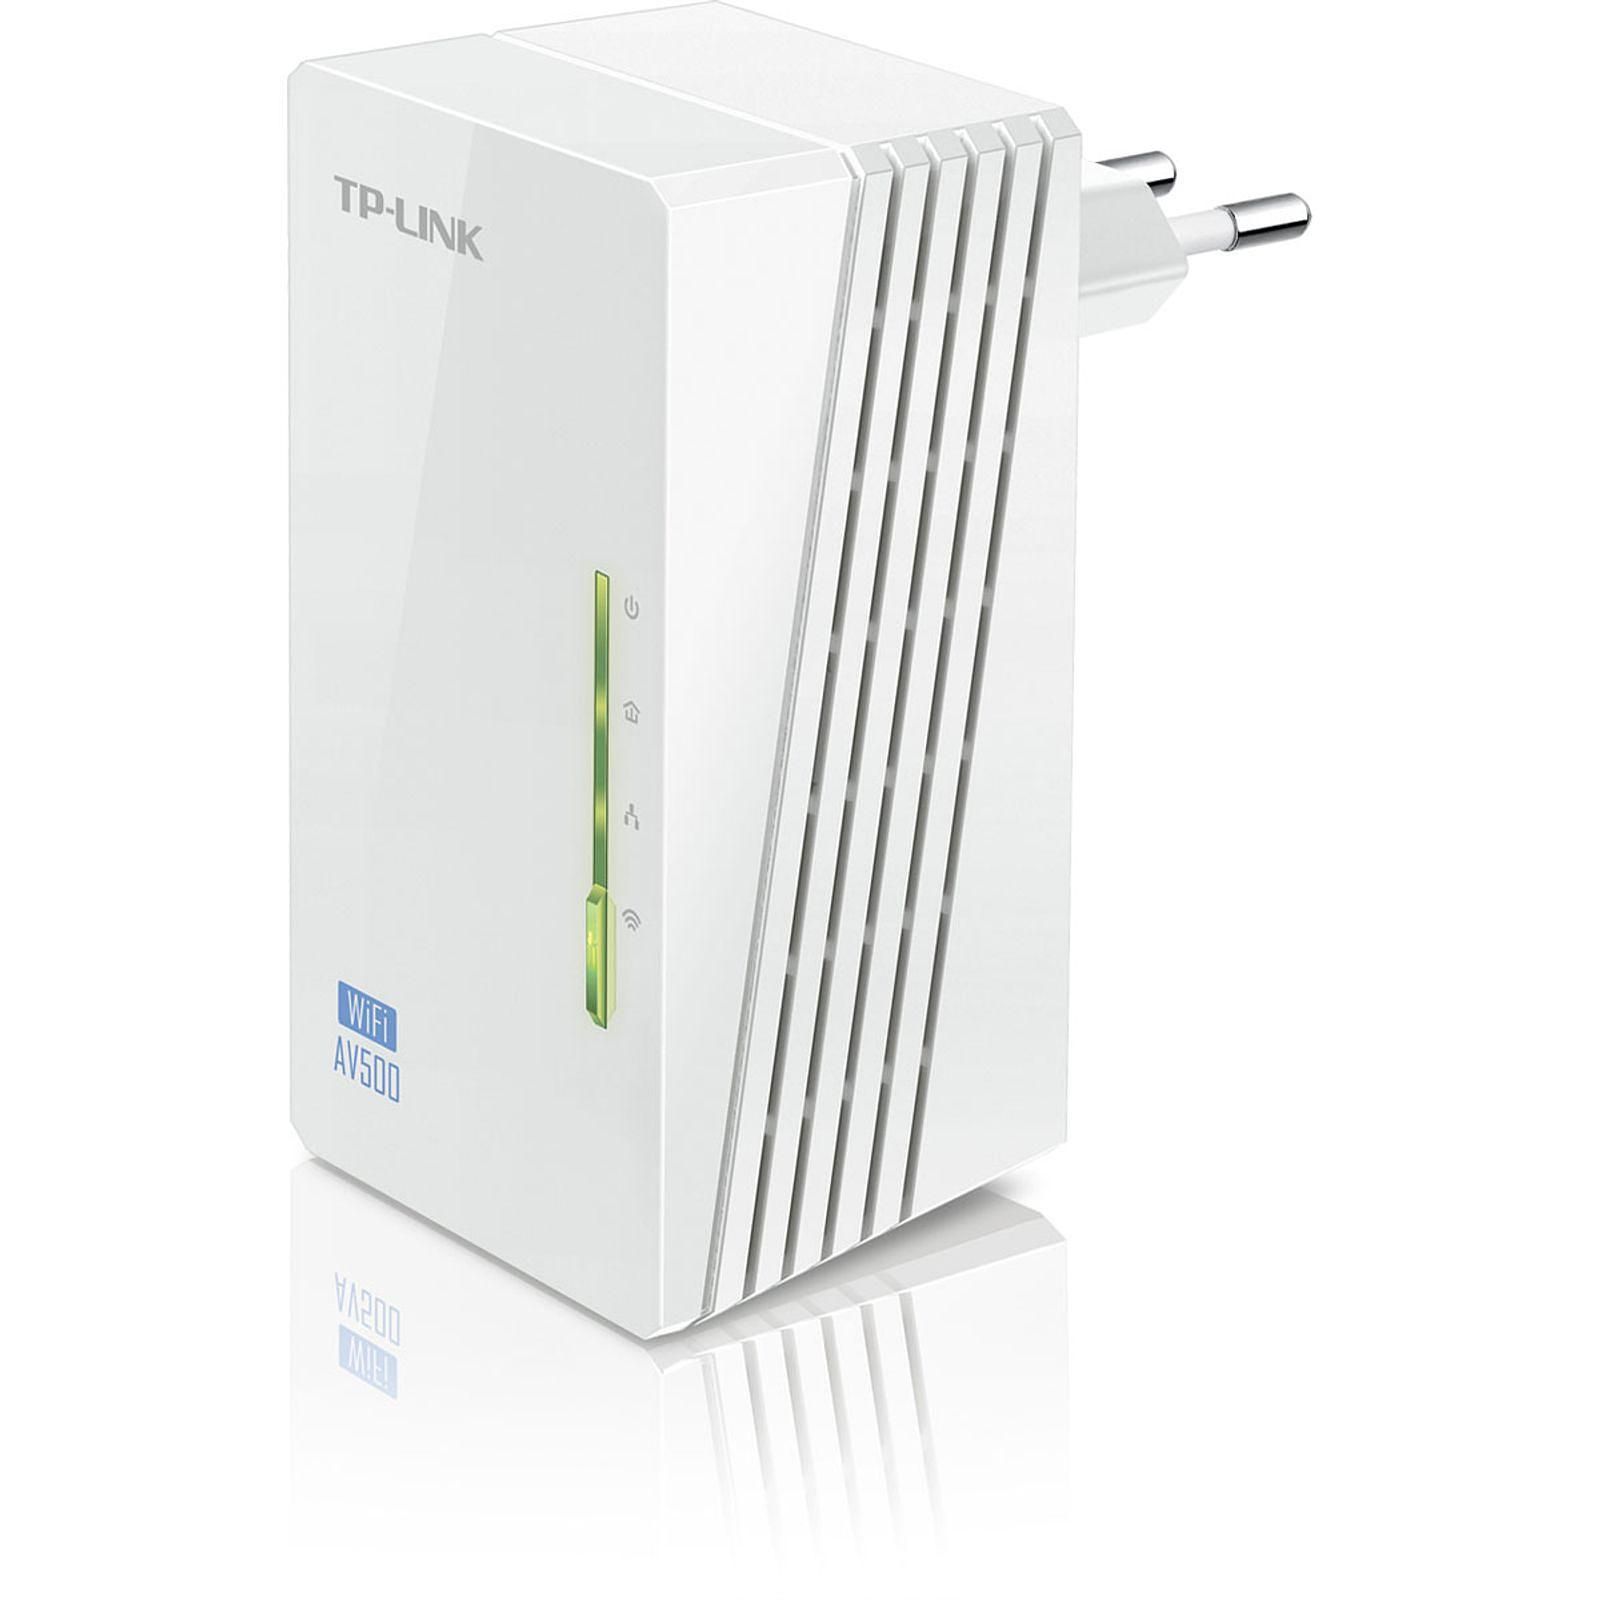 TL-WPA4220 WiFi Extender CPL 500Mbps/WiFi 300Mbps